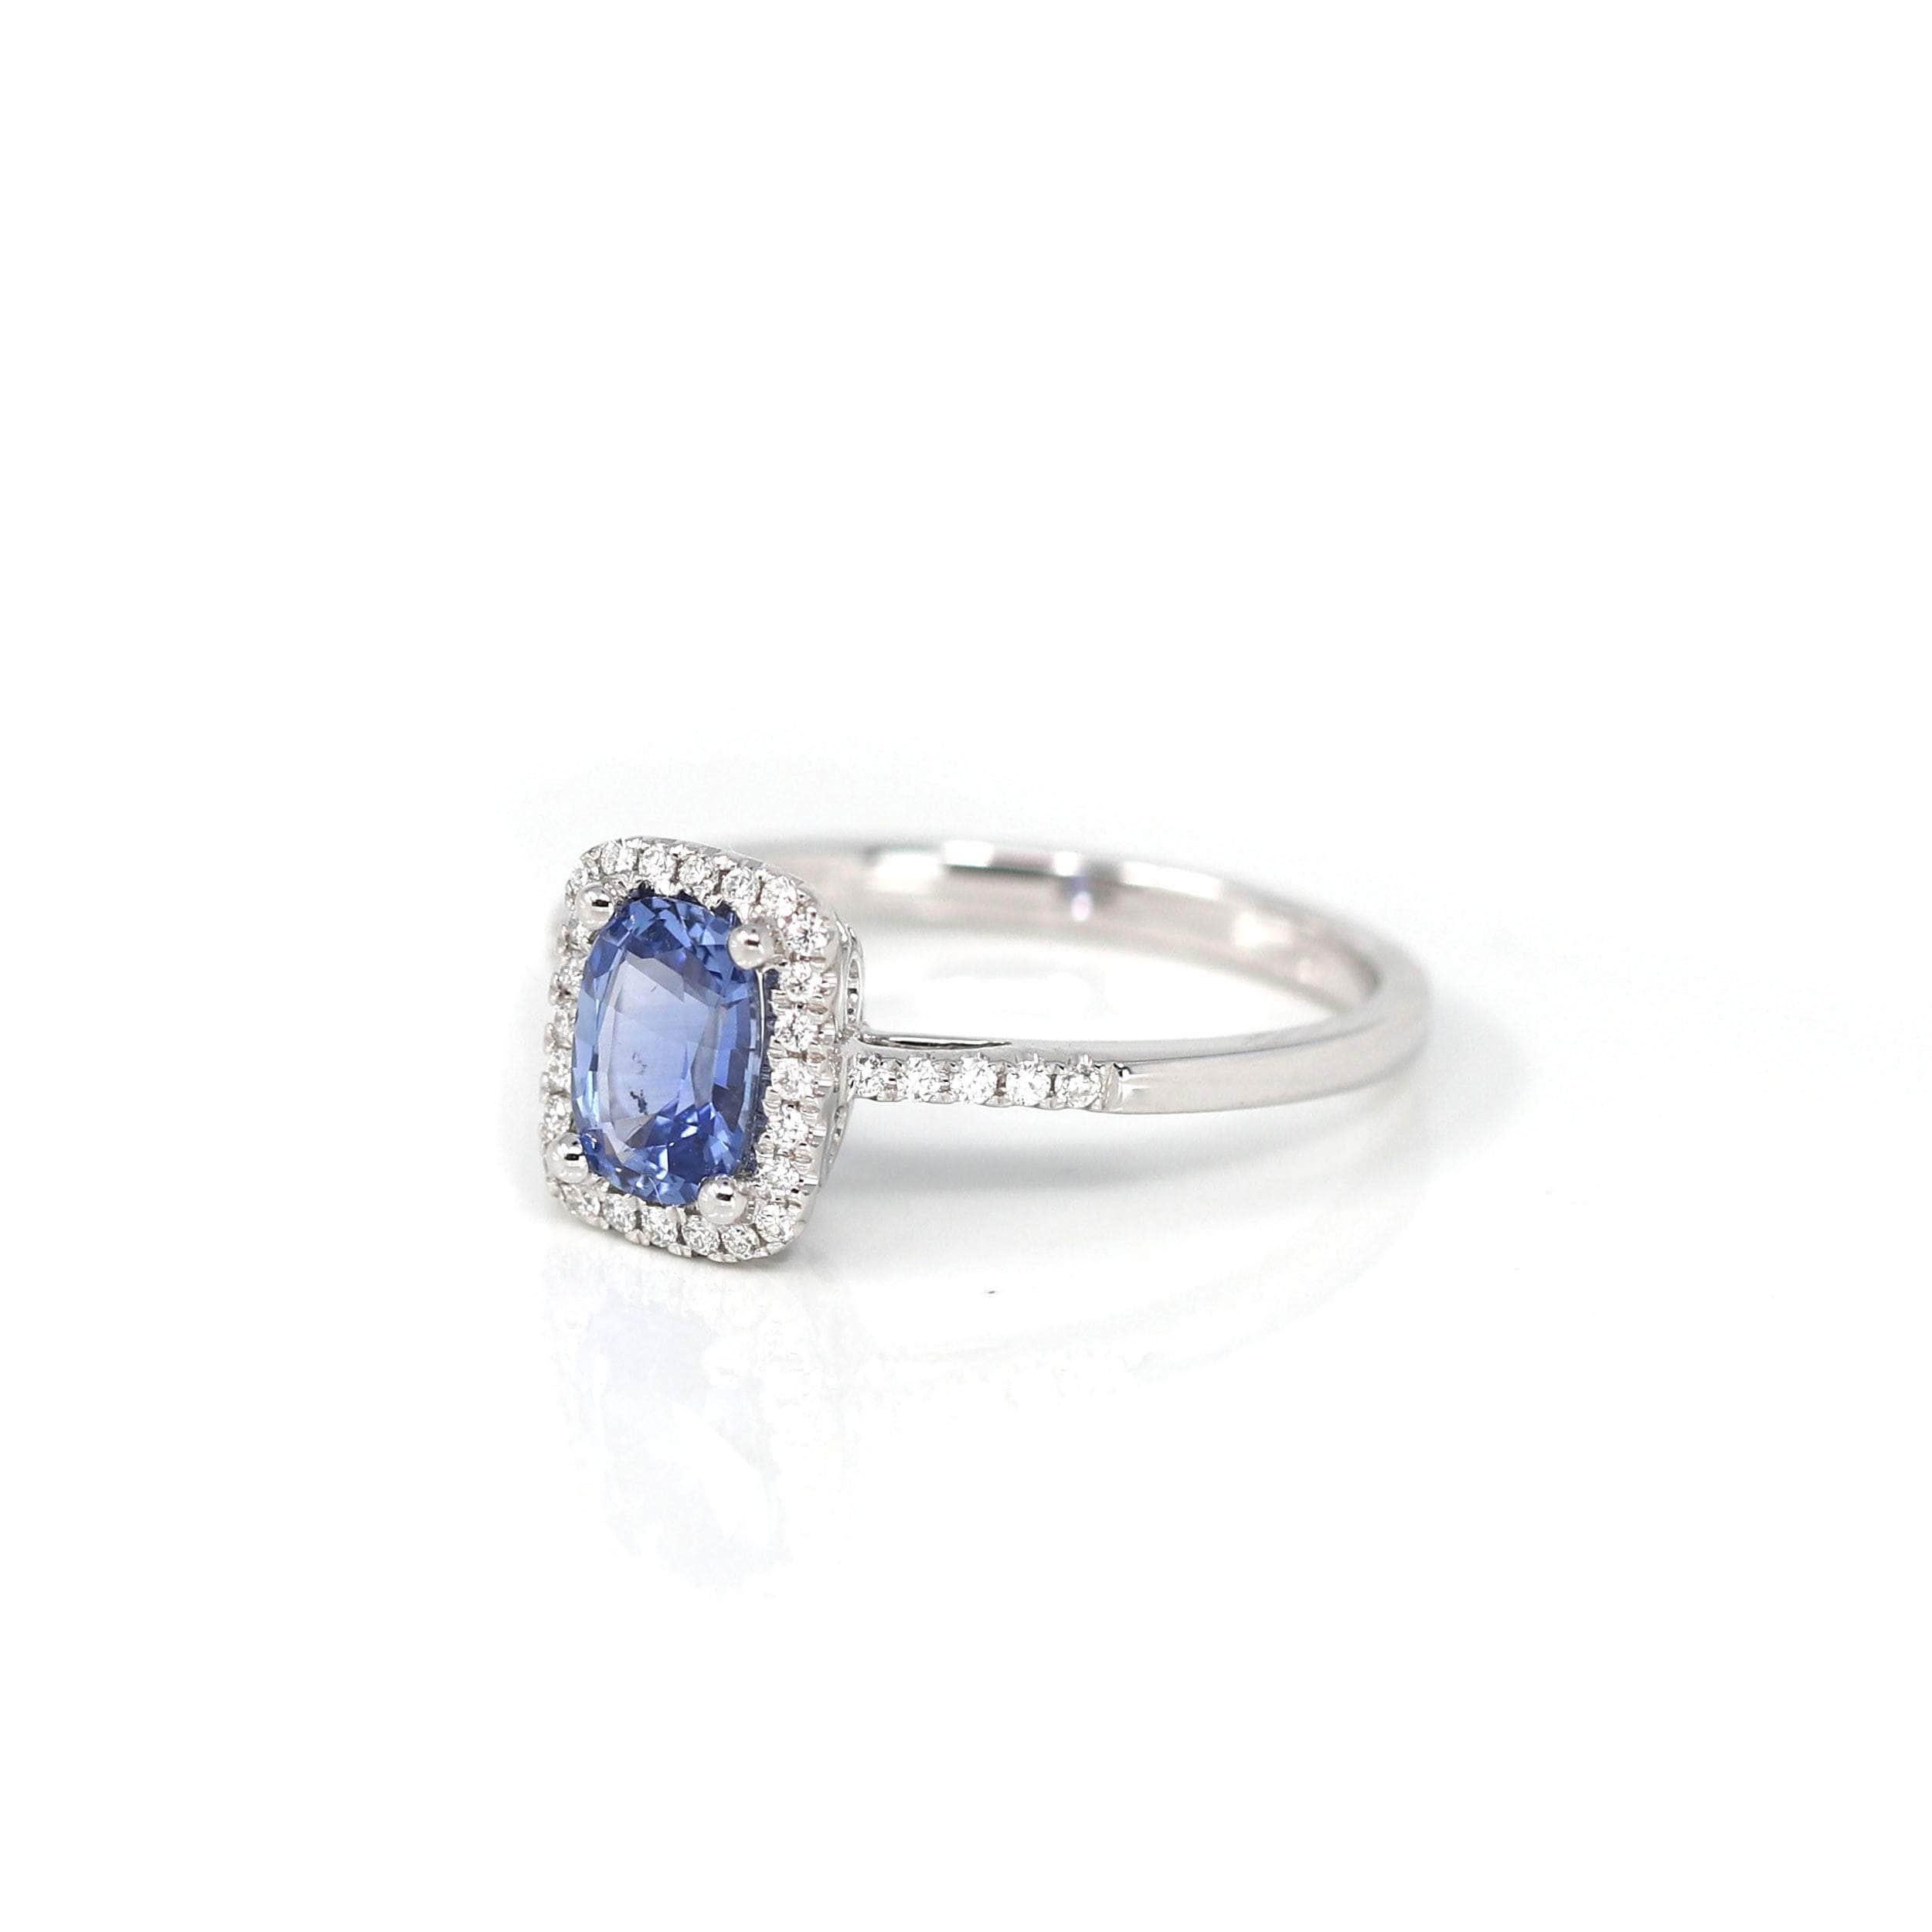 * Design Concept--- This ring features an Fancy Cut 0.91 ct genuine Sir Lanka Sapphire. The design is simplistic yet elegant. The ring looks very exquisite with some diamonds tracing the accents. Baikalla artisans are dedicated to combining